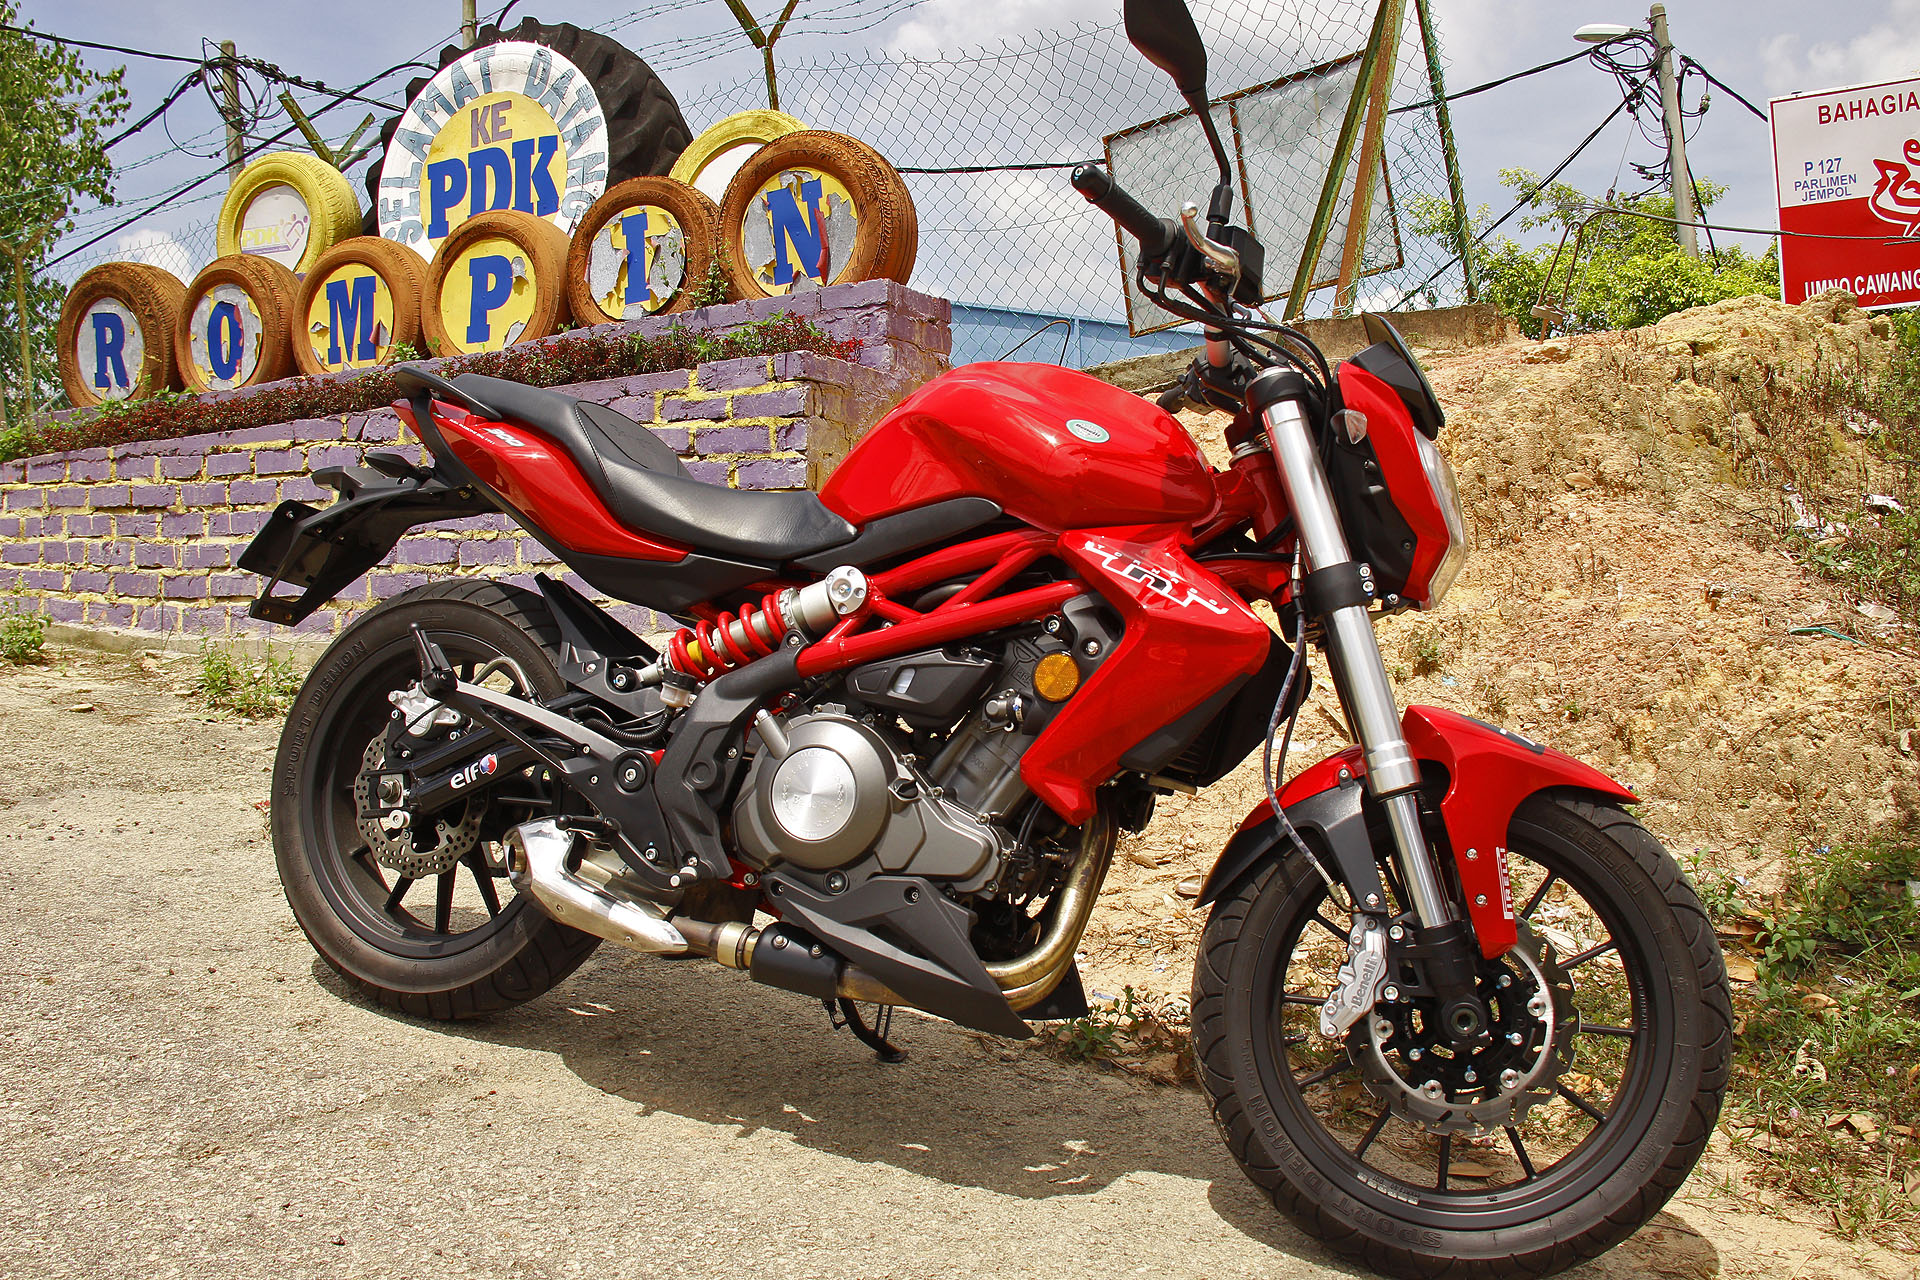 Benelli TNT 300: Fun and Agile In An Affordable Package